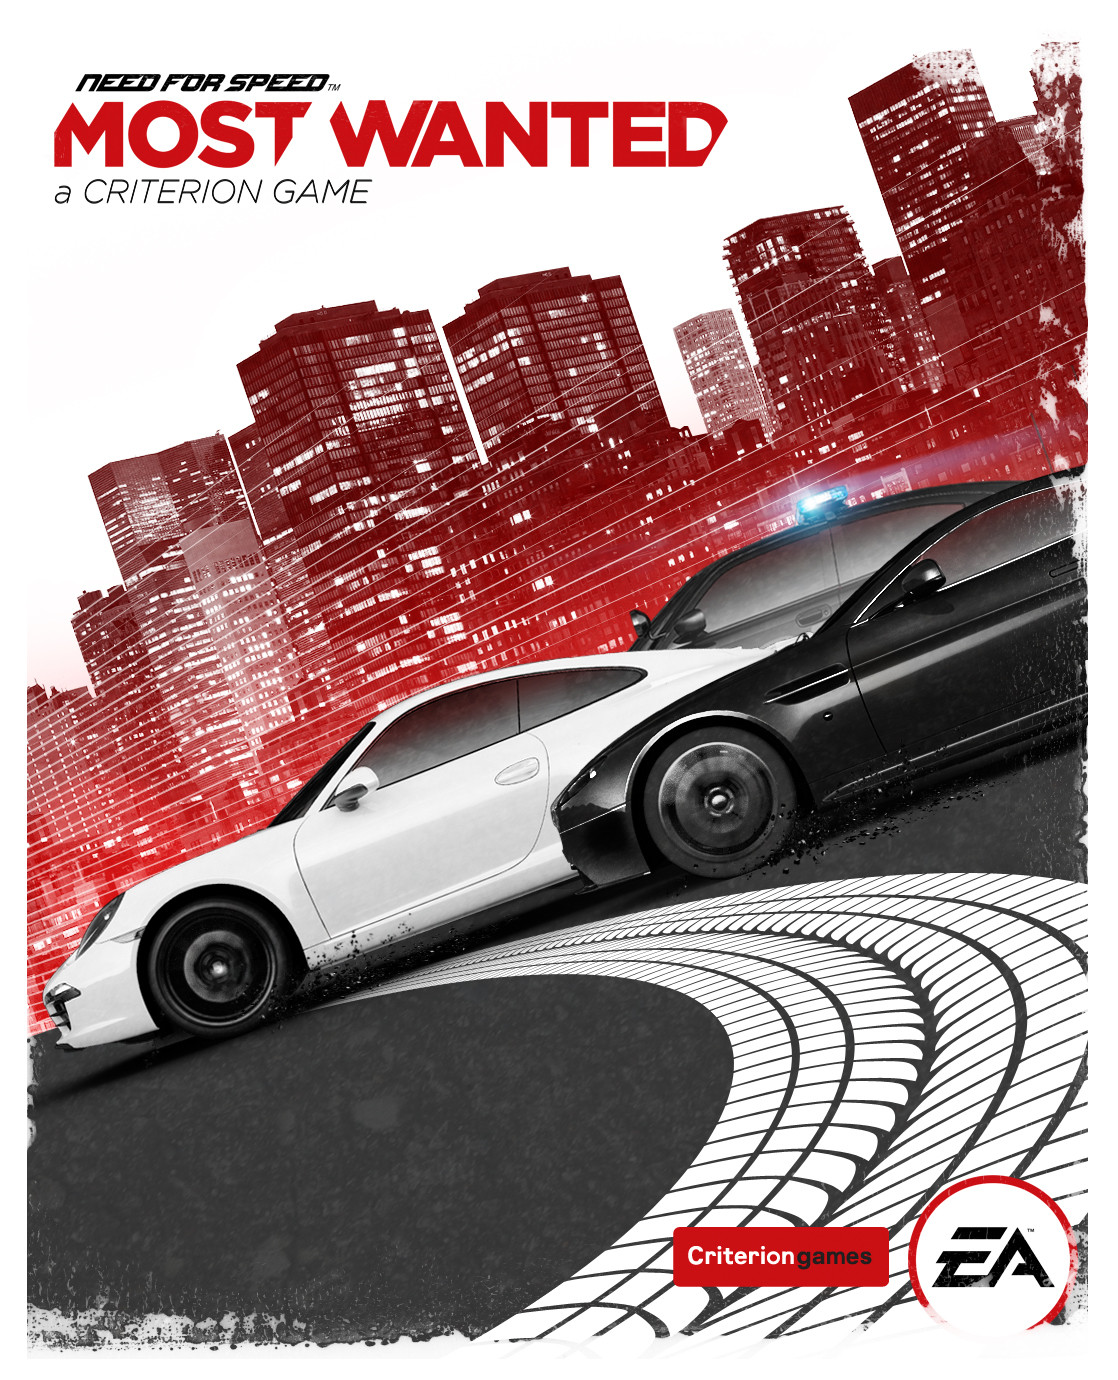 http://glacier928.files.wordpress.com/2012/06/need-for-speed-most-wanted-box-art.jpg